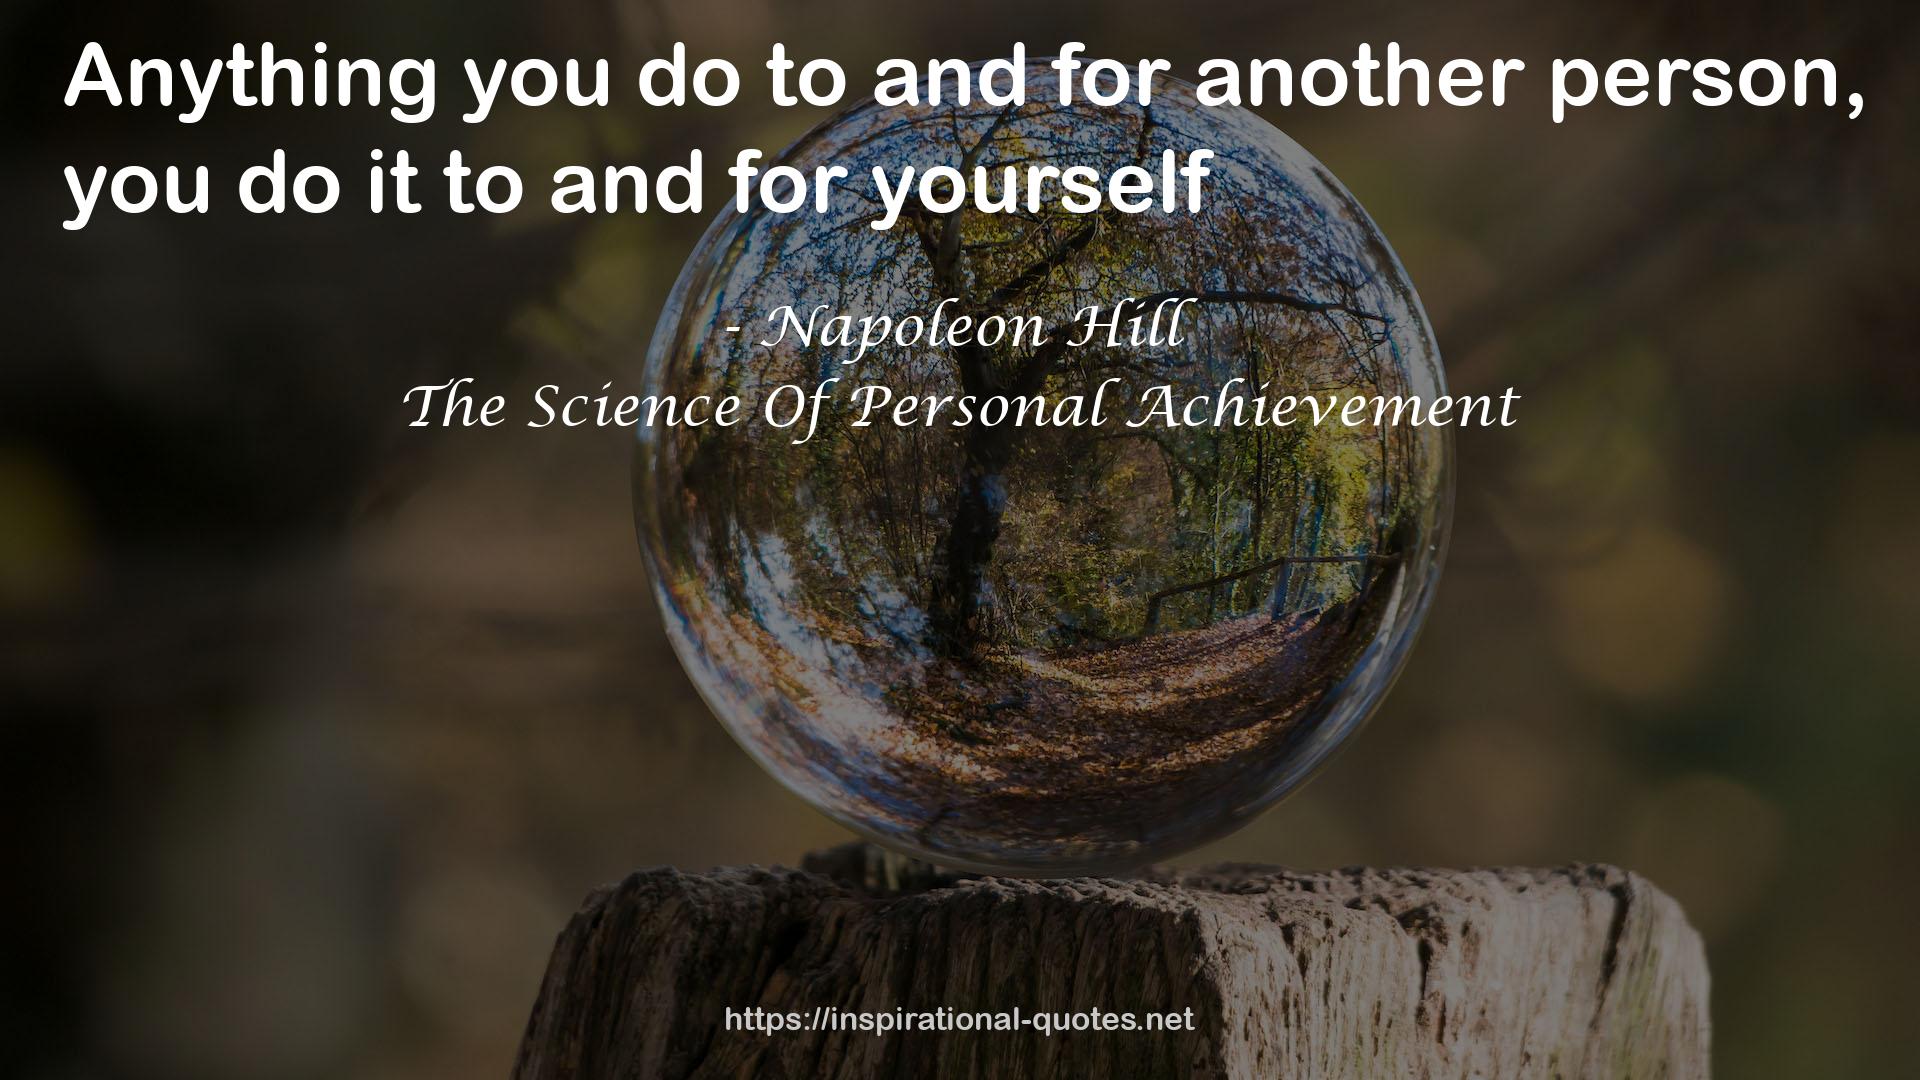 The Science Of Personal Achievement QUOTES